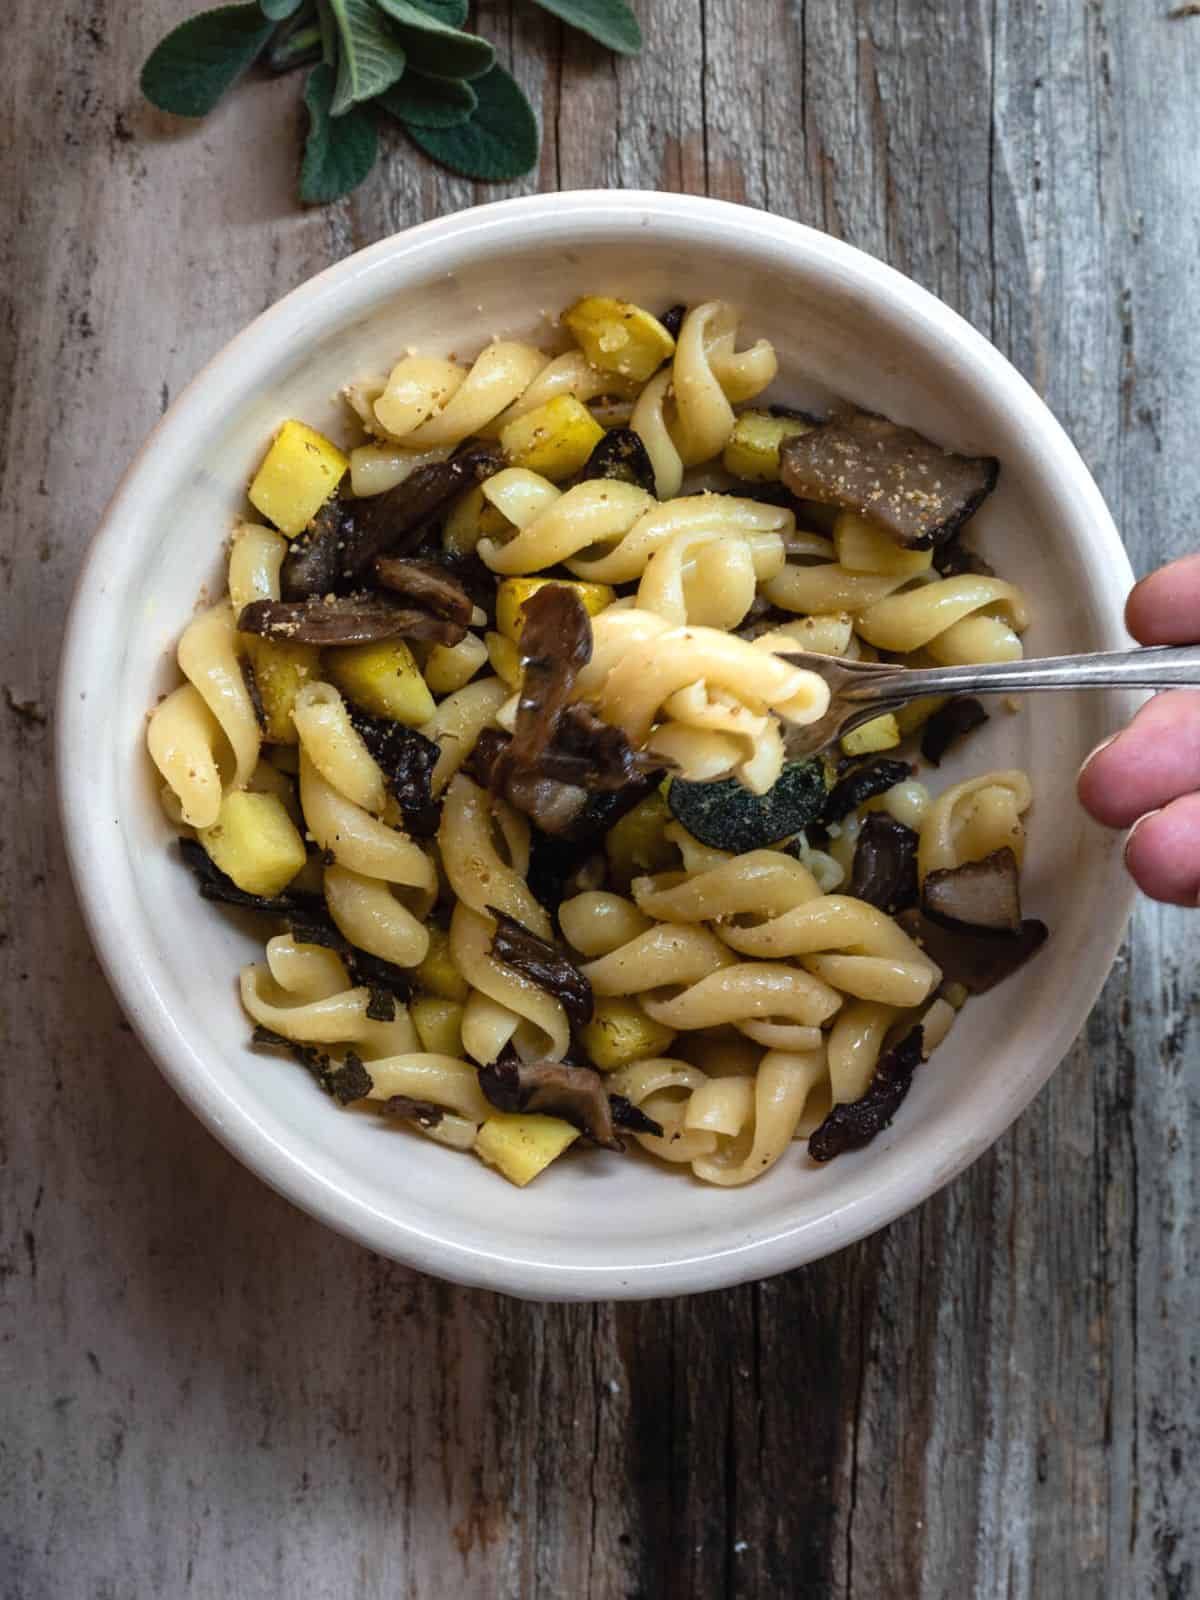 Me holding a fork with Mushrooms Pasta with Potatoes and Sage. It's in a light bowl on a rustic wooden table. The dish shown mushrooms, potatoes and browned sage on top. On the side some fresh sage